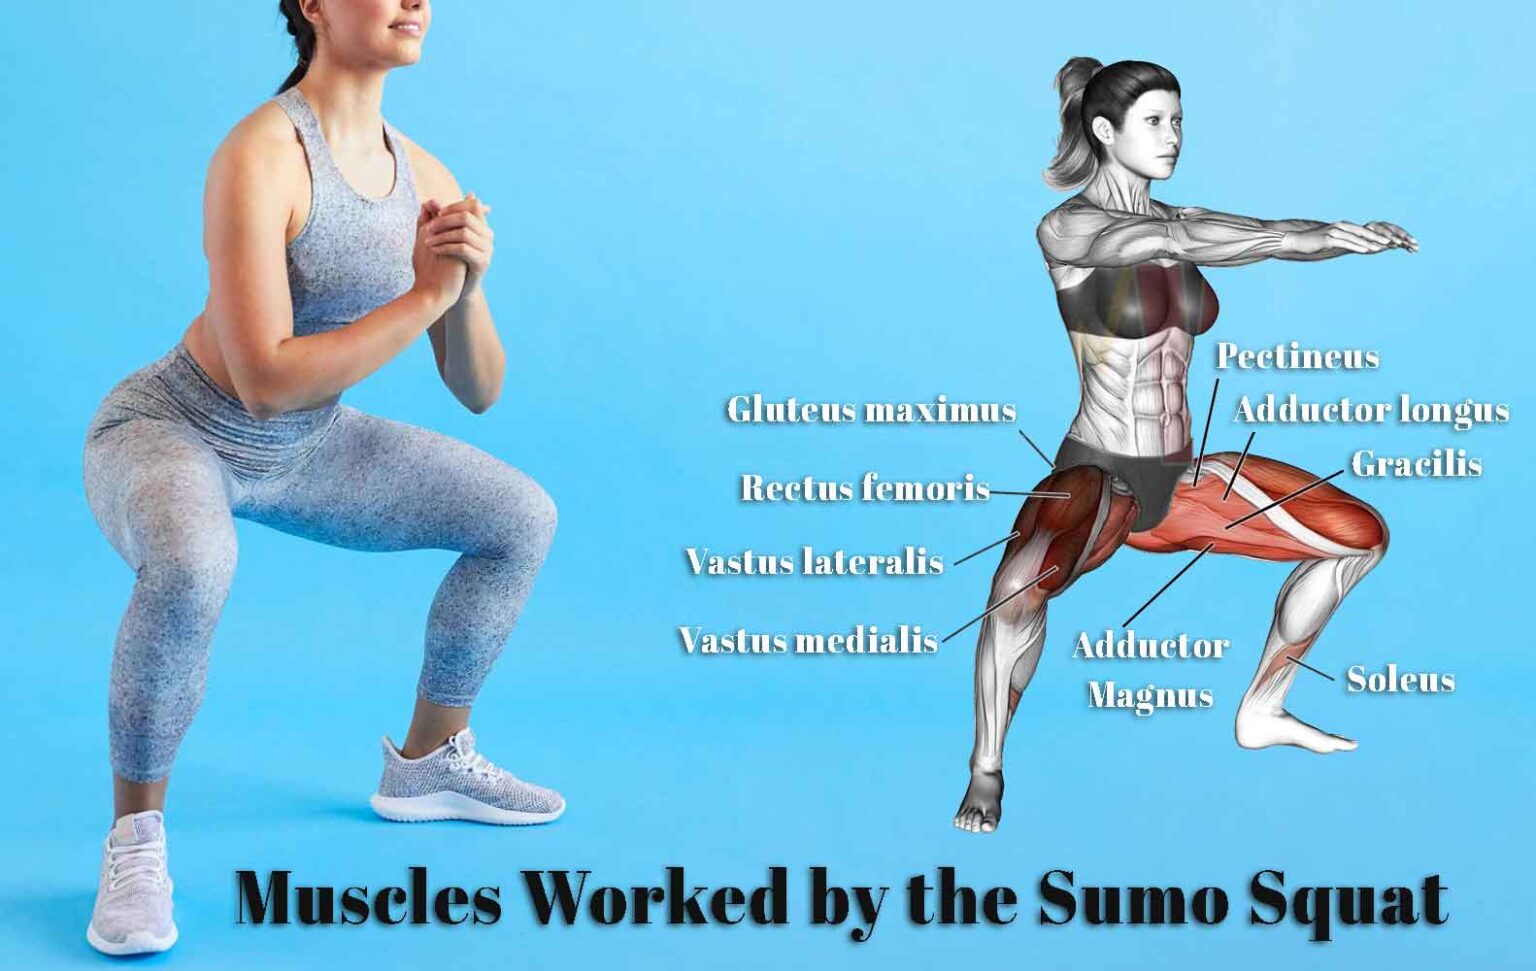 Mastering The Sumo Squat: Form, Muscles Worked, Variations